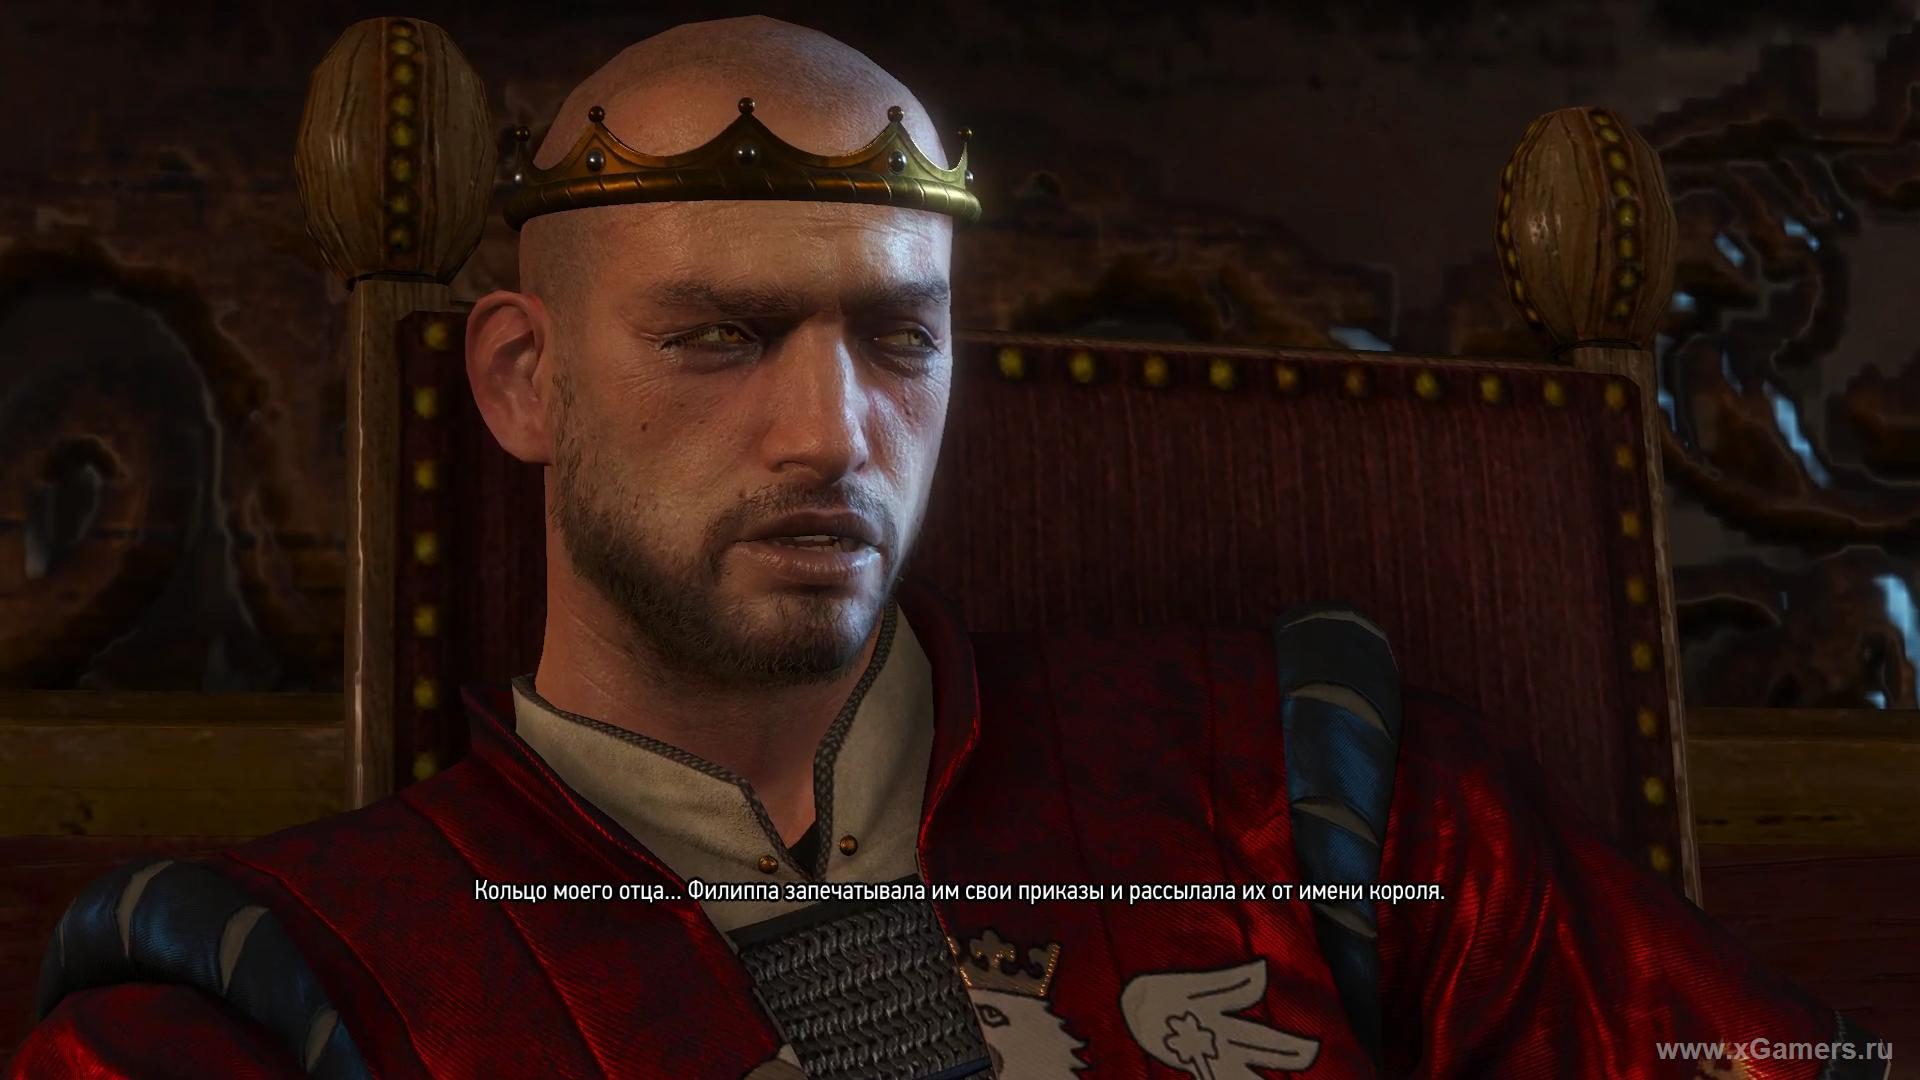 King Radovid the Witcher 3